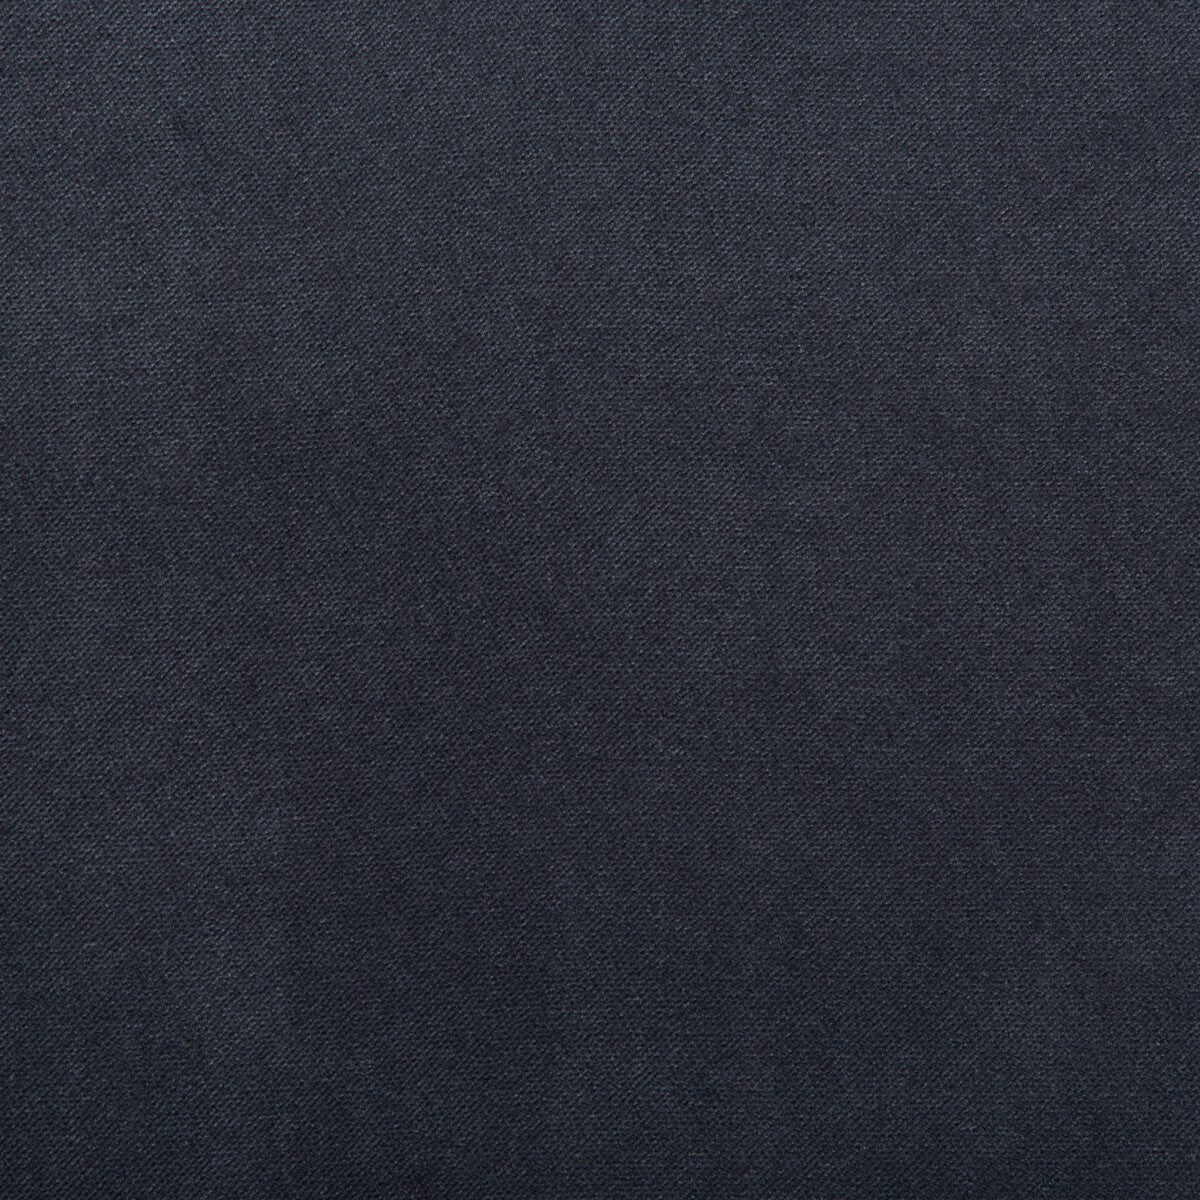 Madison Velvet fabric in midnight color - pattern 35402.85.0 - by Kravet Contract